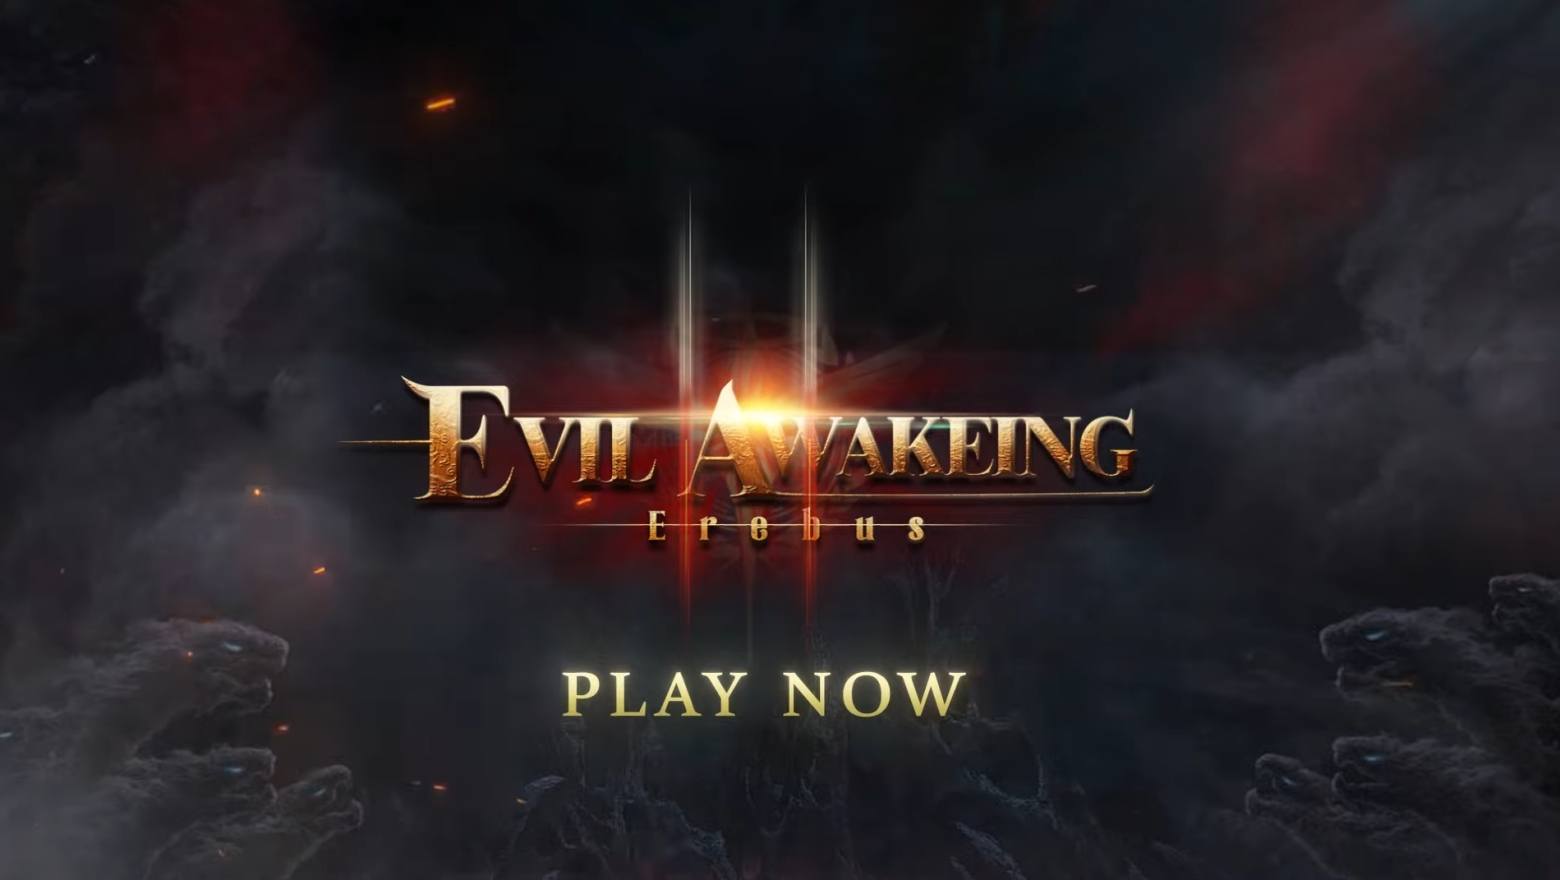 Evil Awakening II: Erebus, The Much-Anticipated MMORPG Sequel, is Now Available For Download on Android Devices